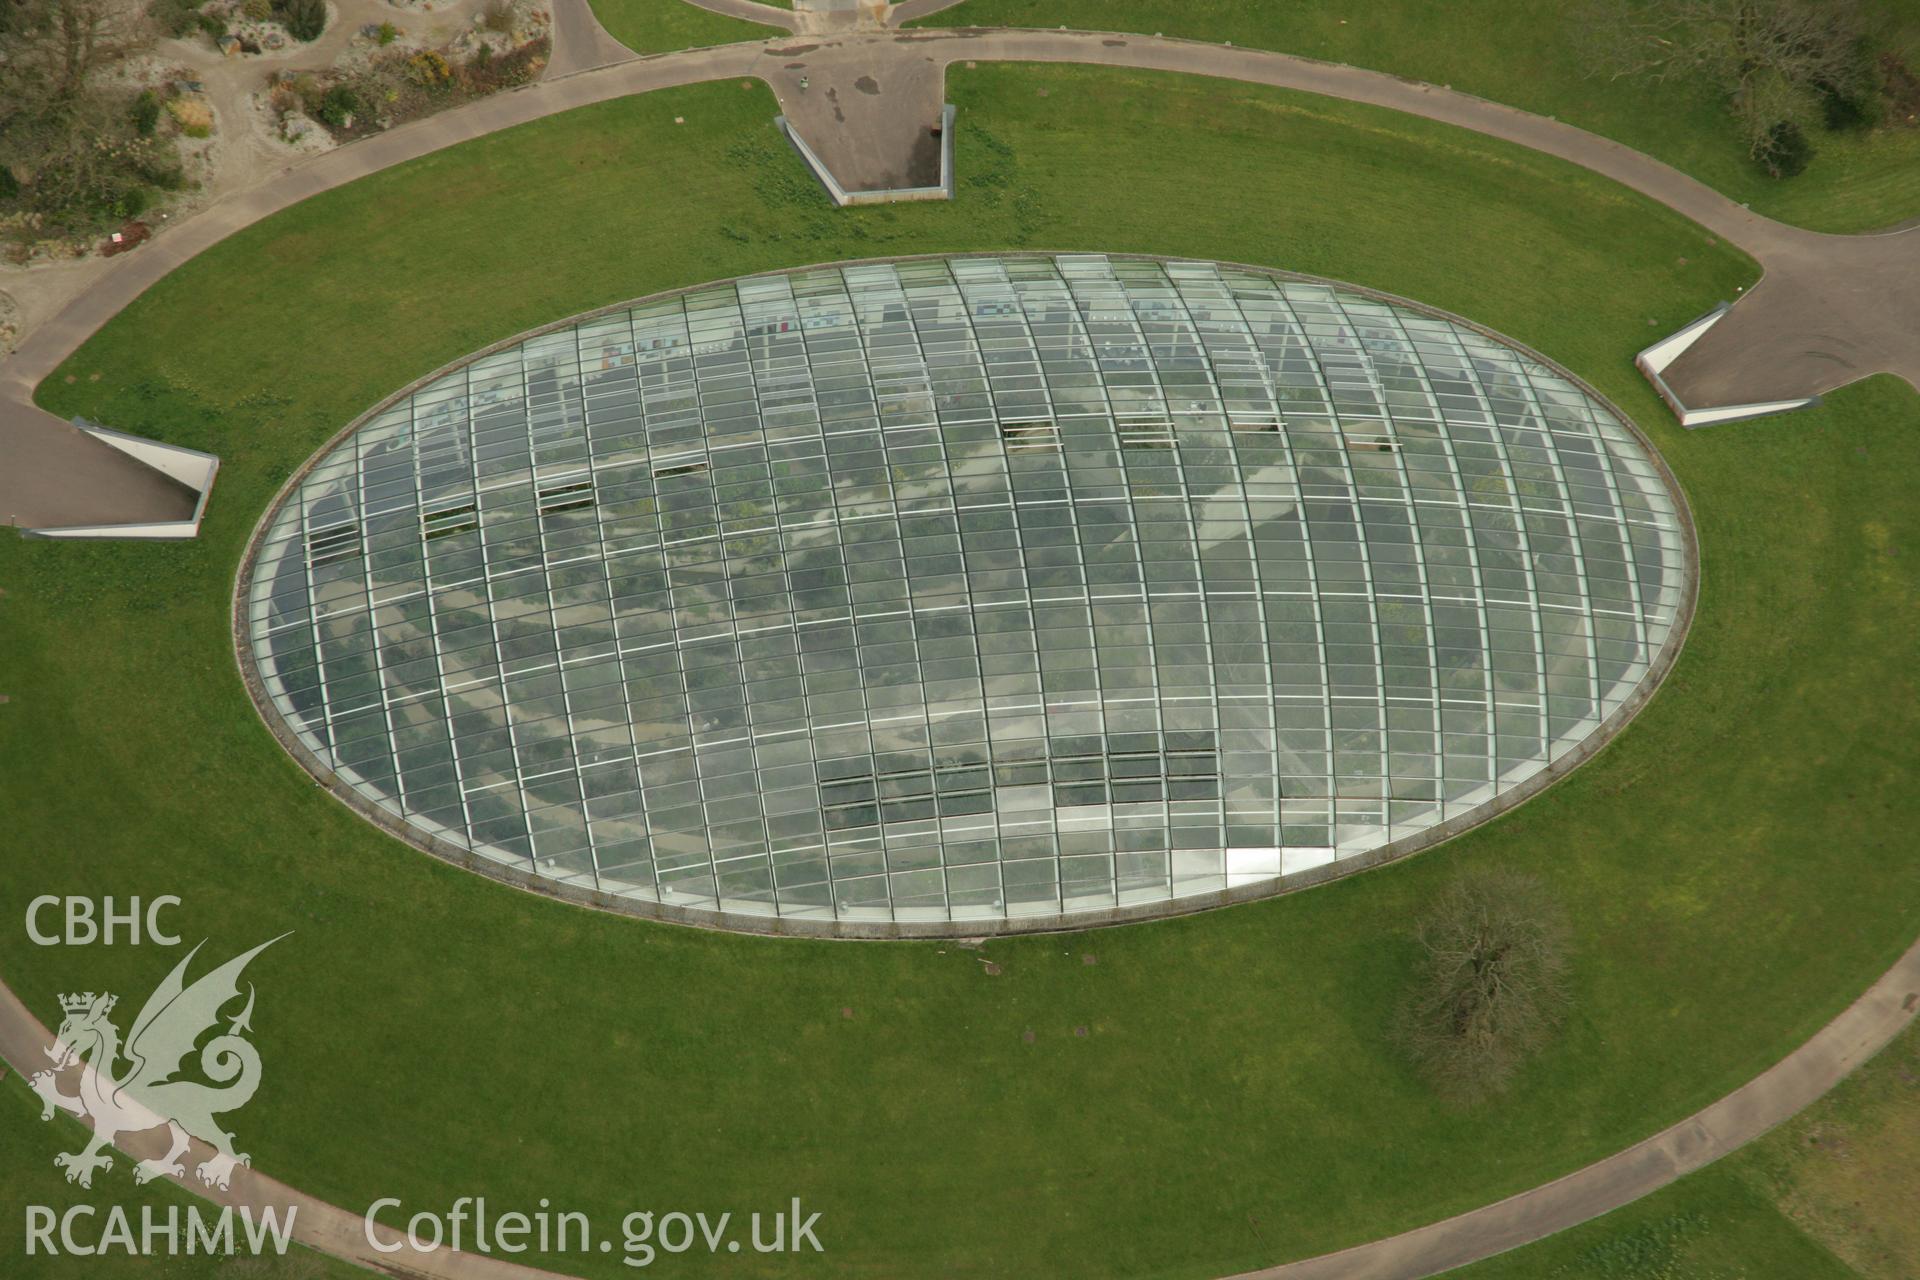 RCAHMW colour oblique aerial photograph of The Great Glasshouse, National Botanic Gardens of Wales. Taken on 16 March 2007 by Toby Driver